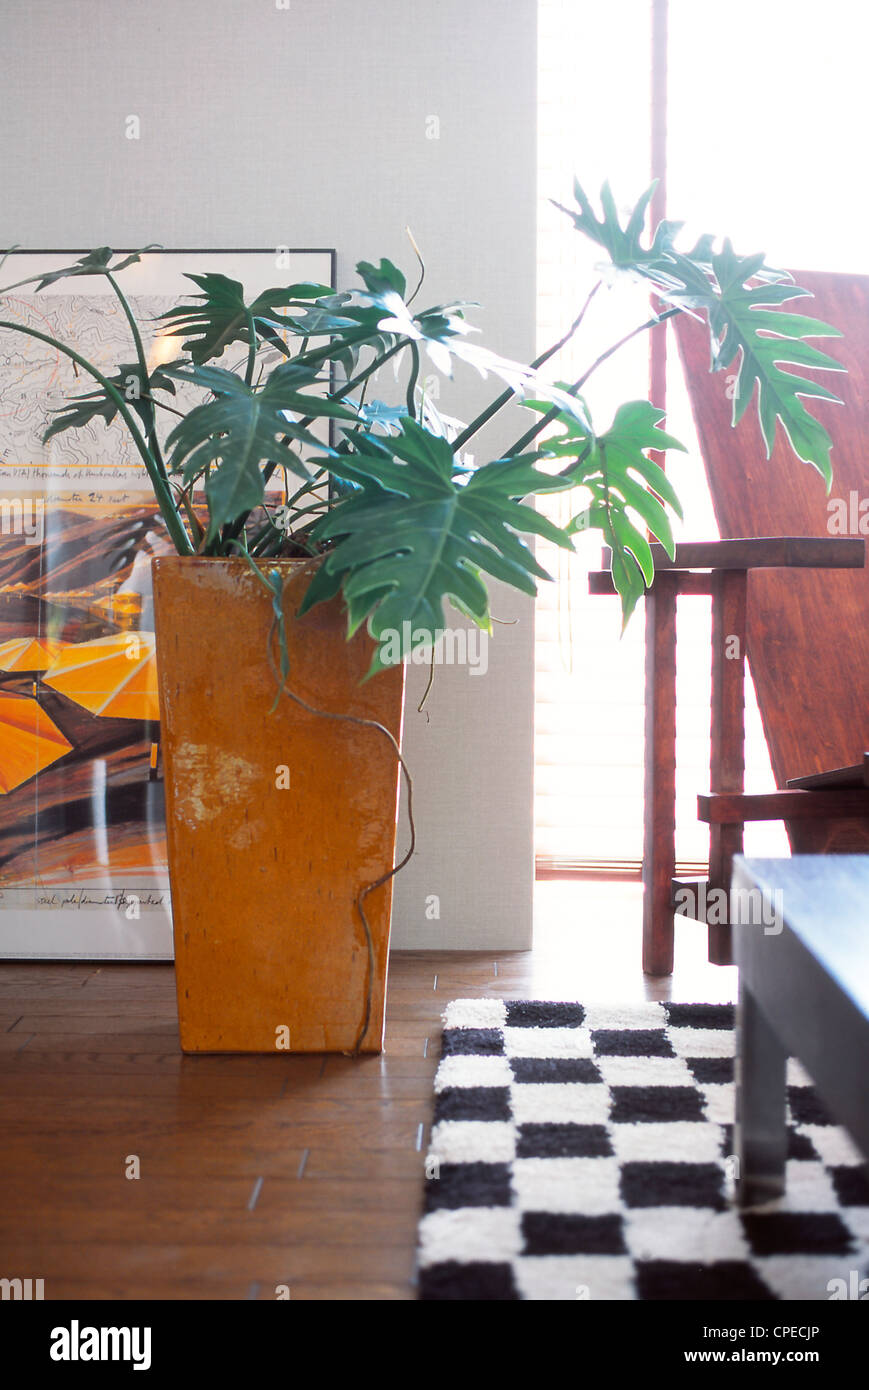 Large Potted Plat Beside Window In Room Stock Photo